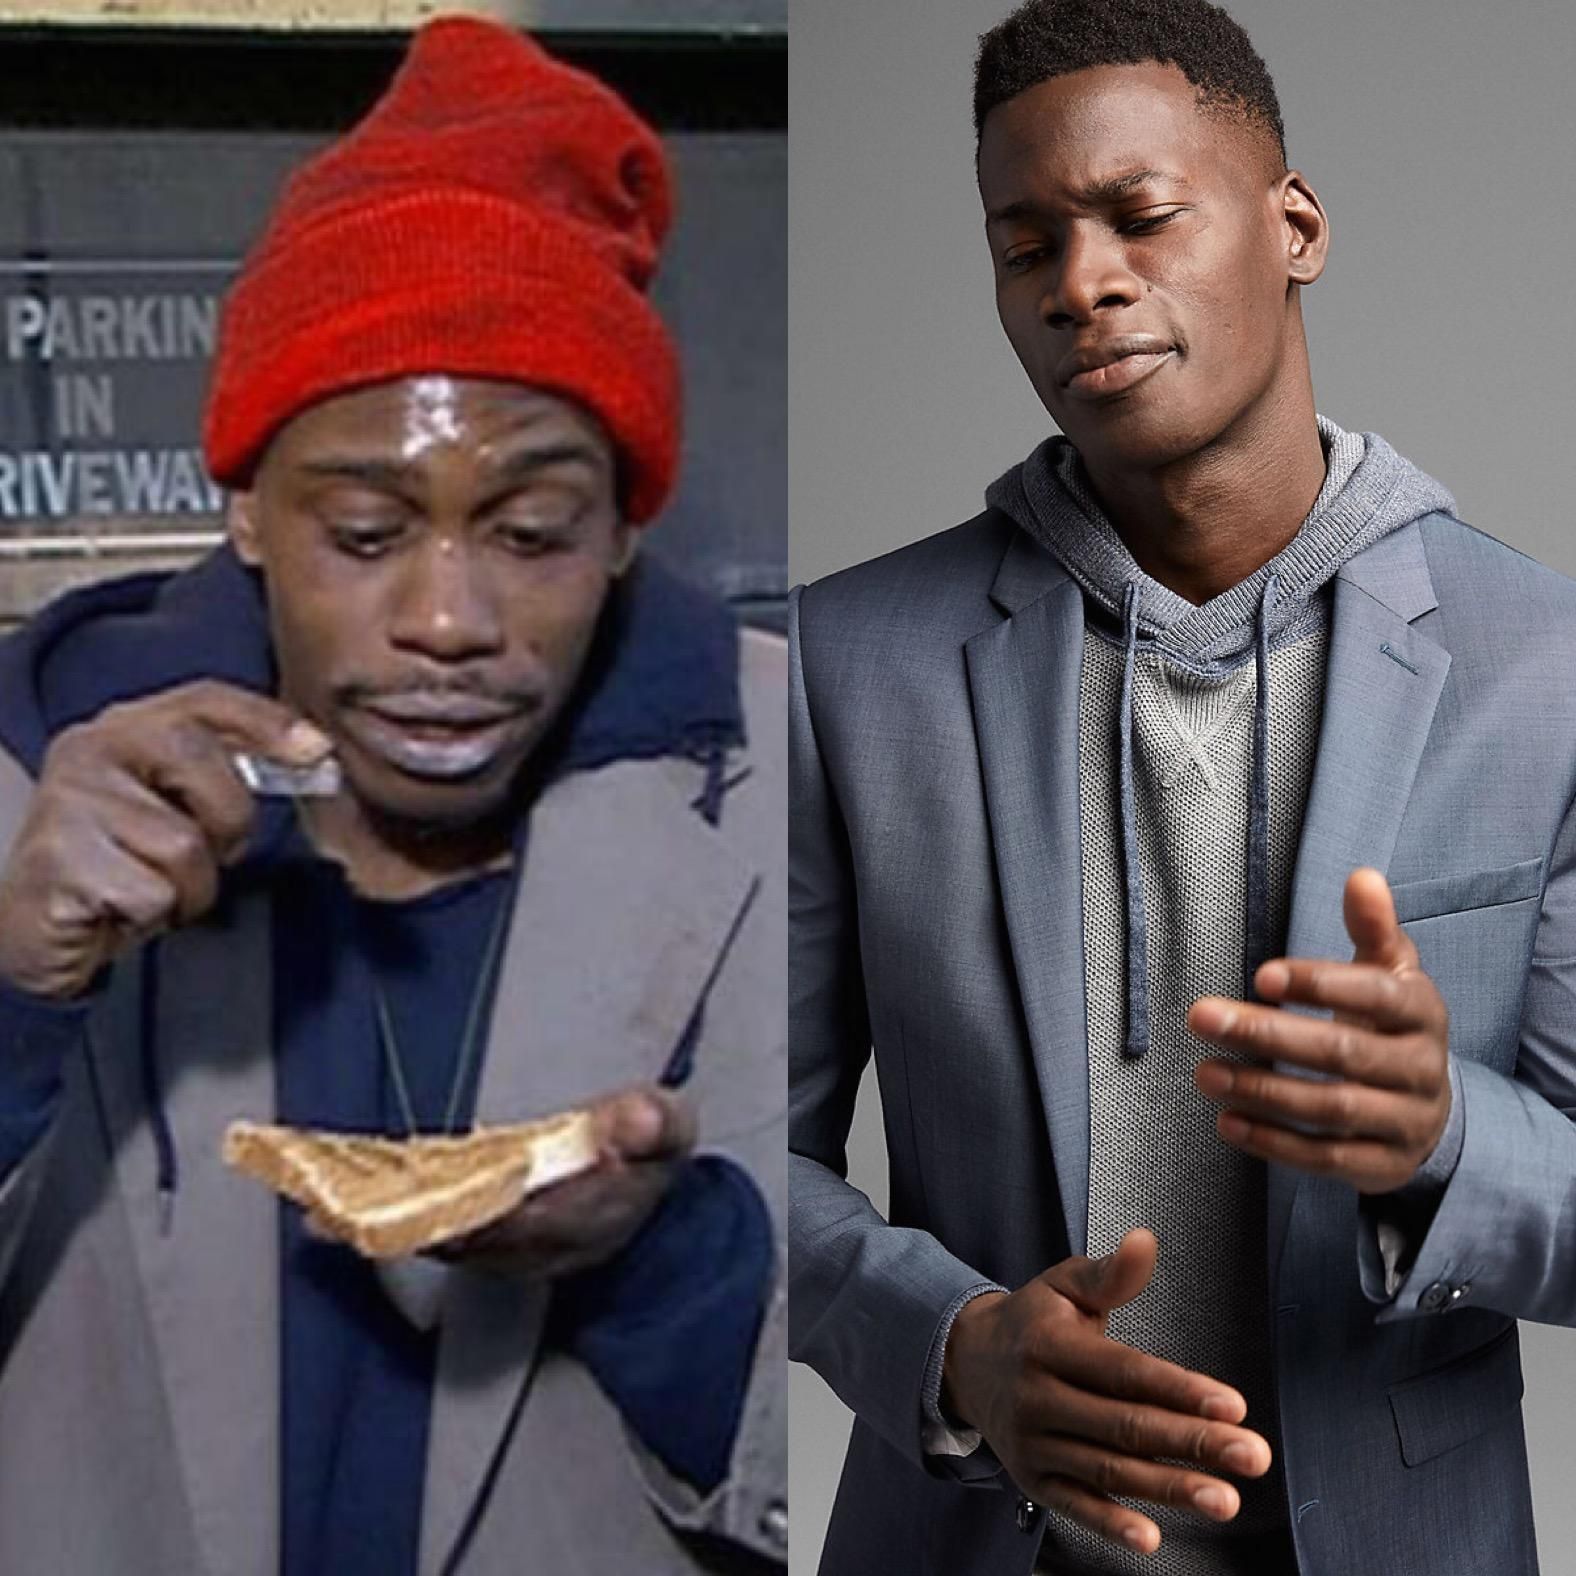 Express Men’s is proud to present their new line, the Tyrone Biggums collection